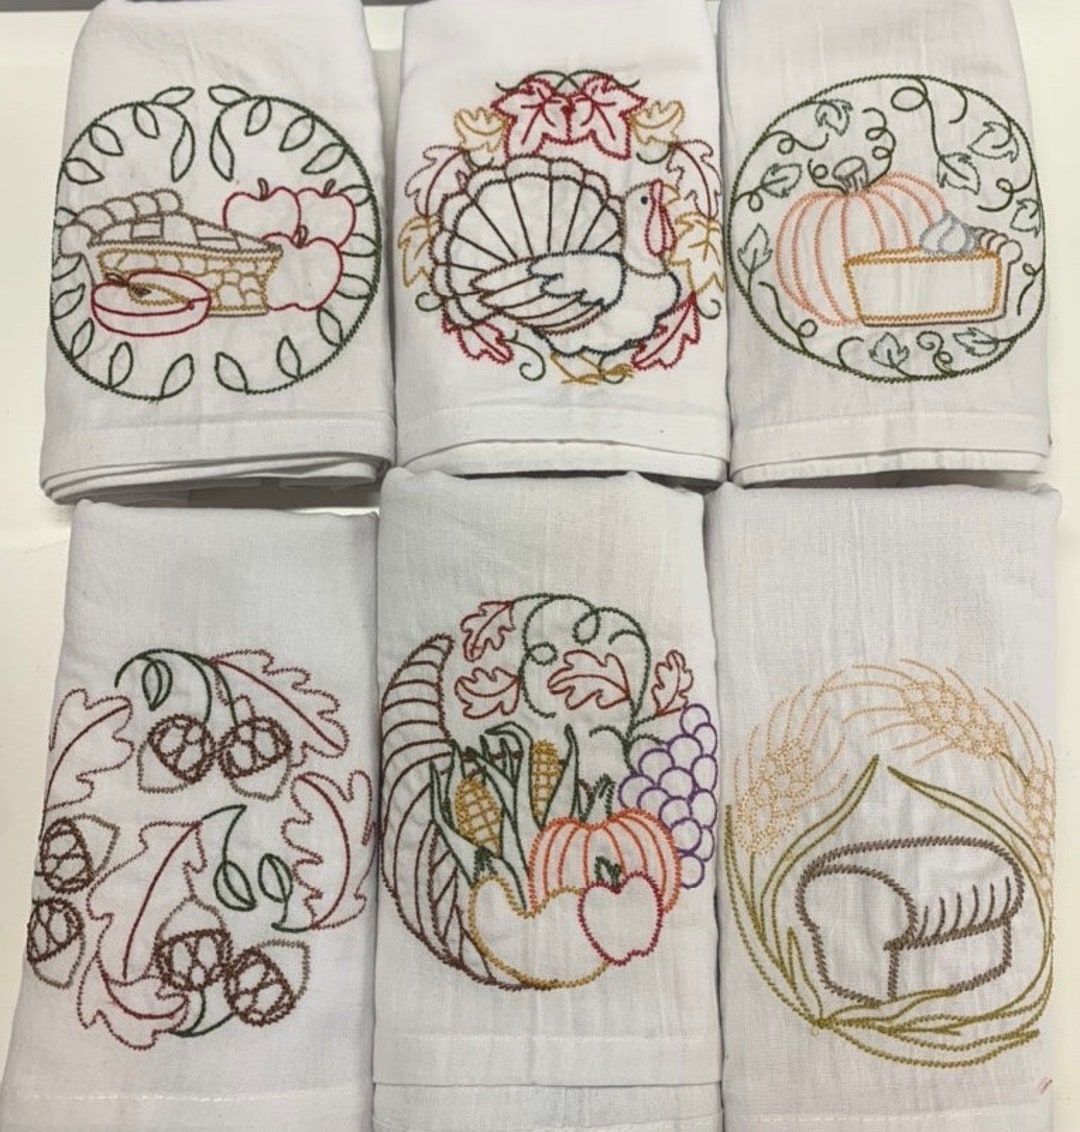 NEW SET OF 7 VINT STYLE HAND EMBROIDERED PIE FLOUR SACK DISH TOWELS